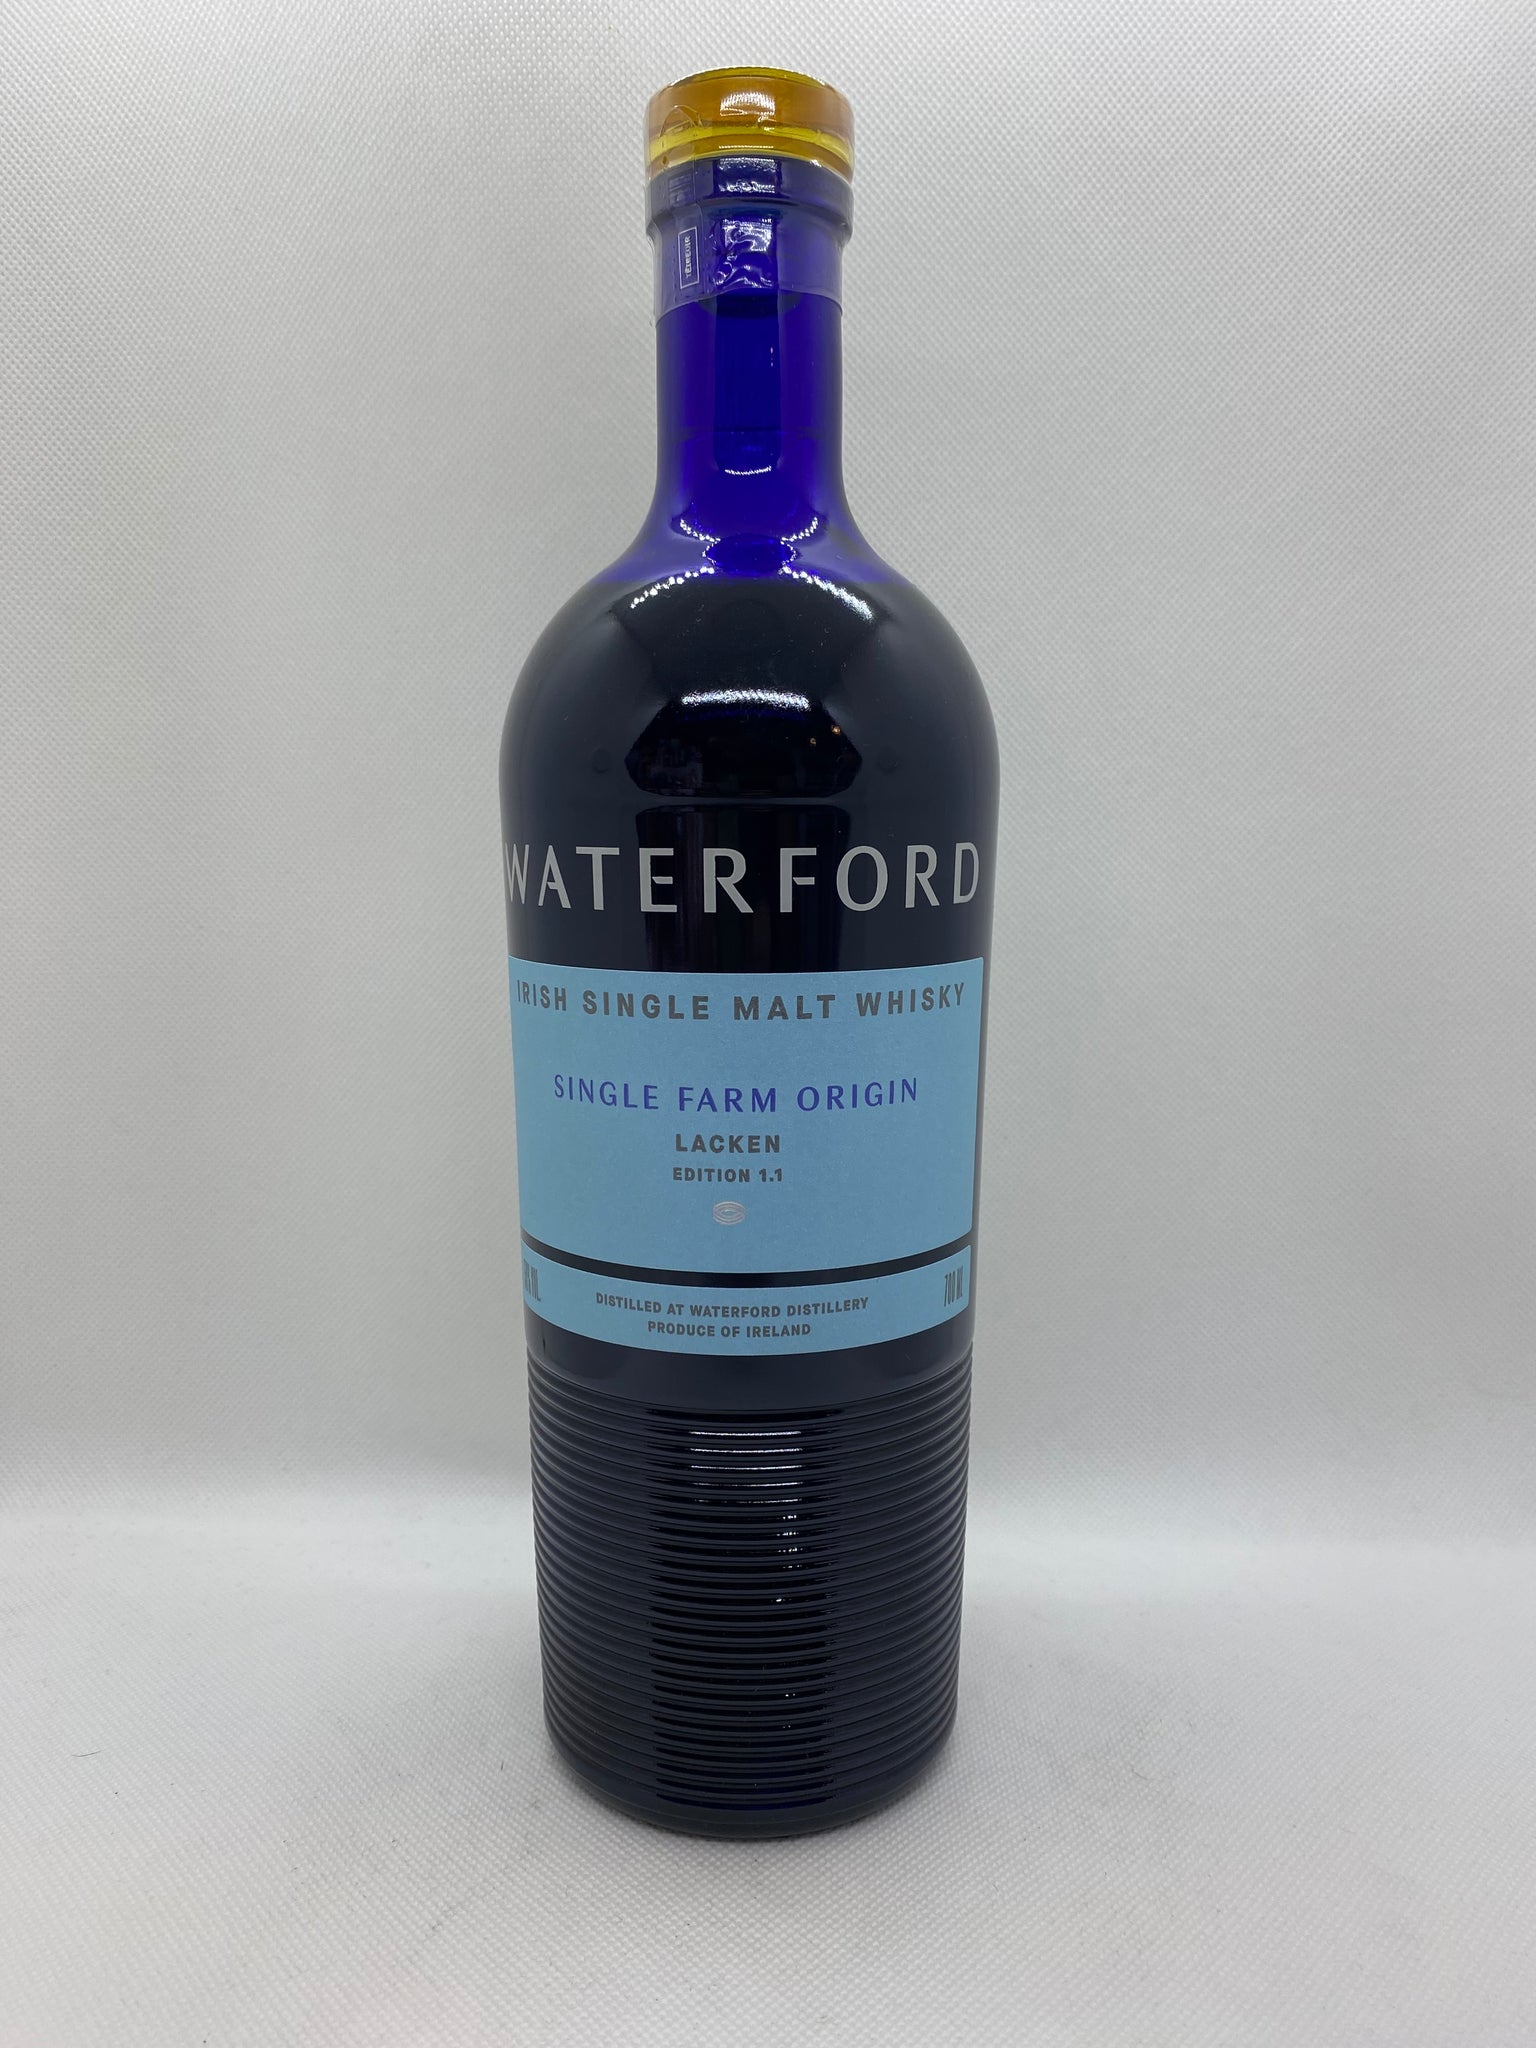 WATERFORD SFO LACKEN EDITION 1.1 50 % 70 CL